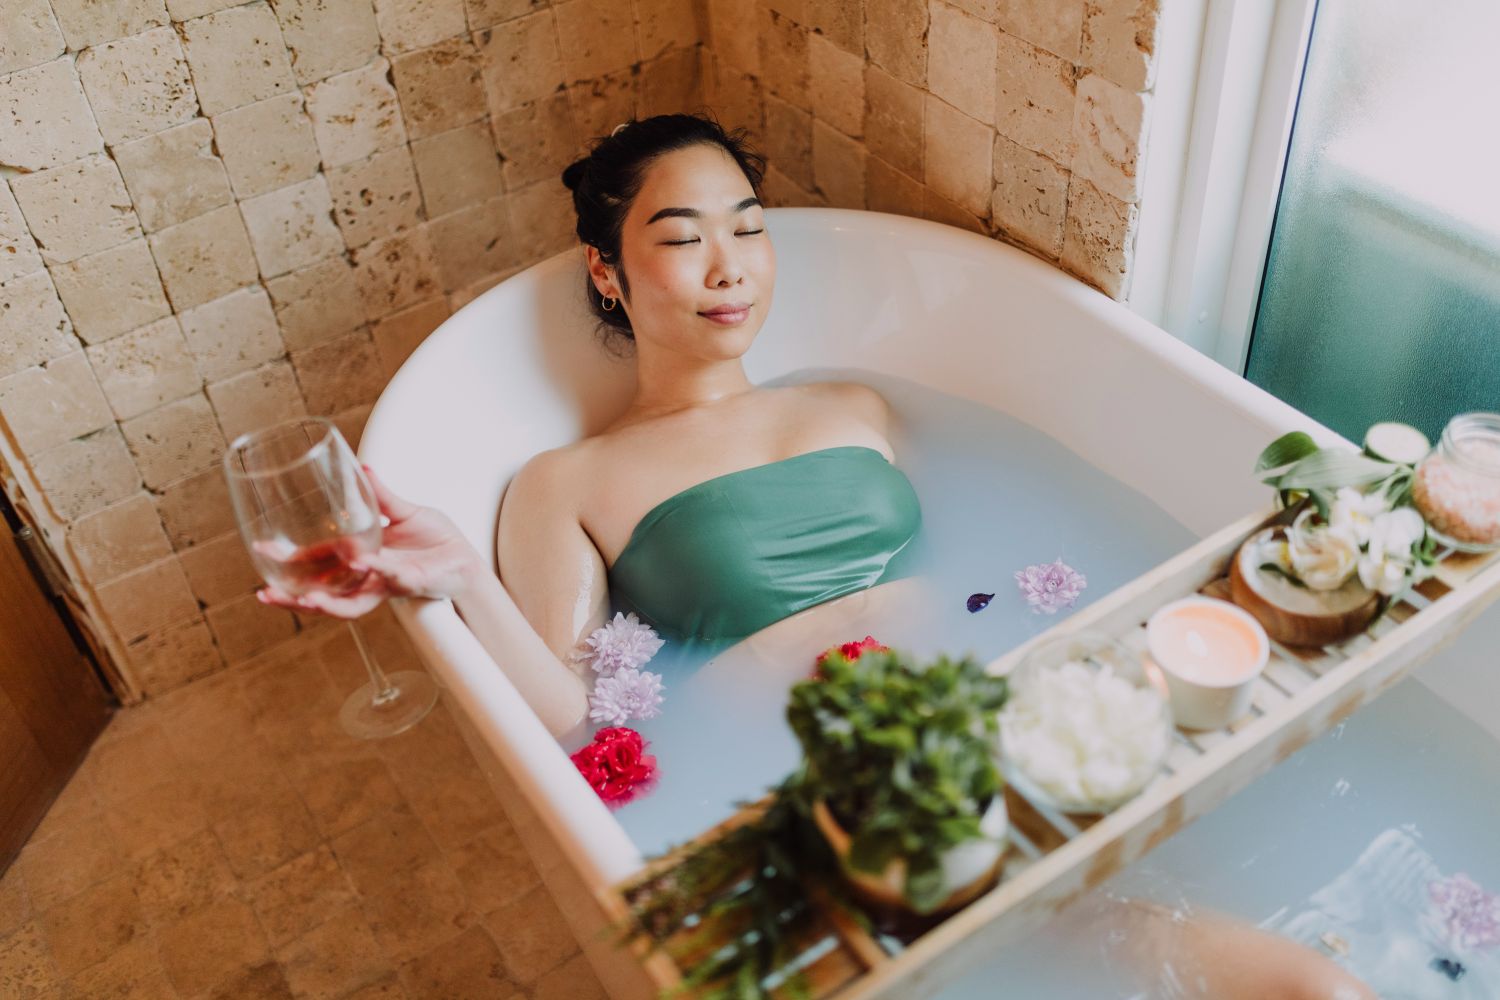 Asian language enjoying luxury travel in the bathtub with a glass of wine